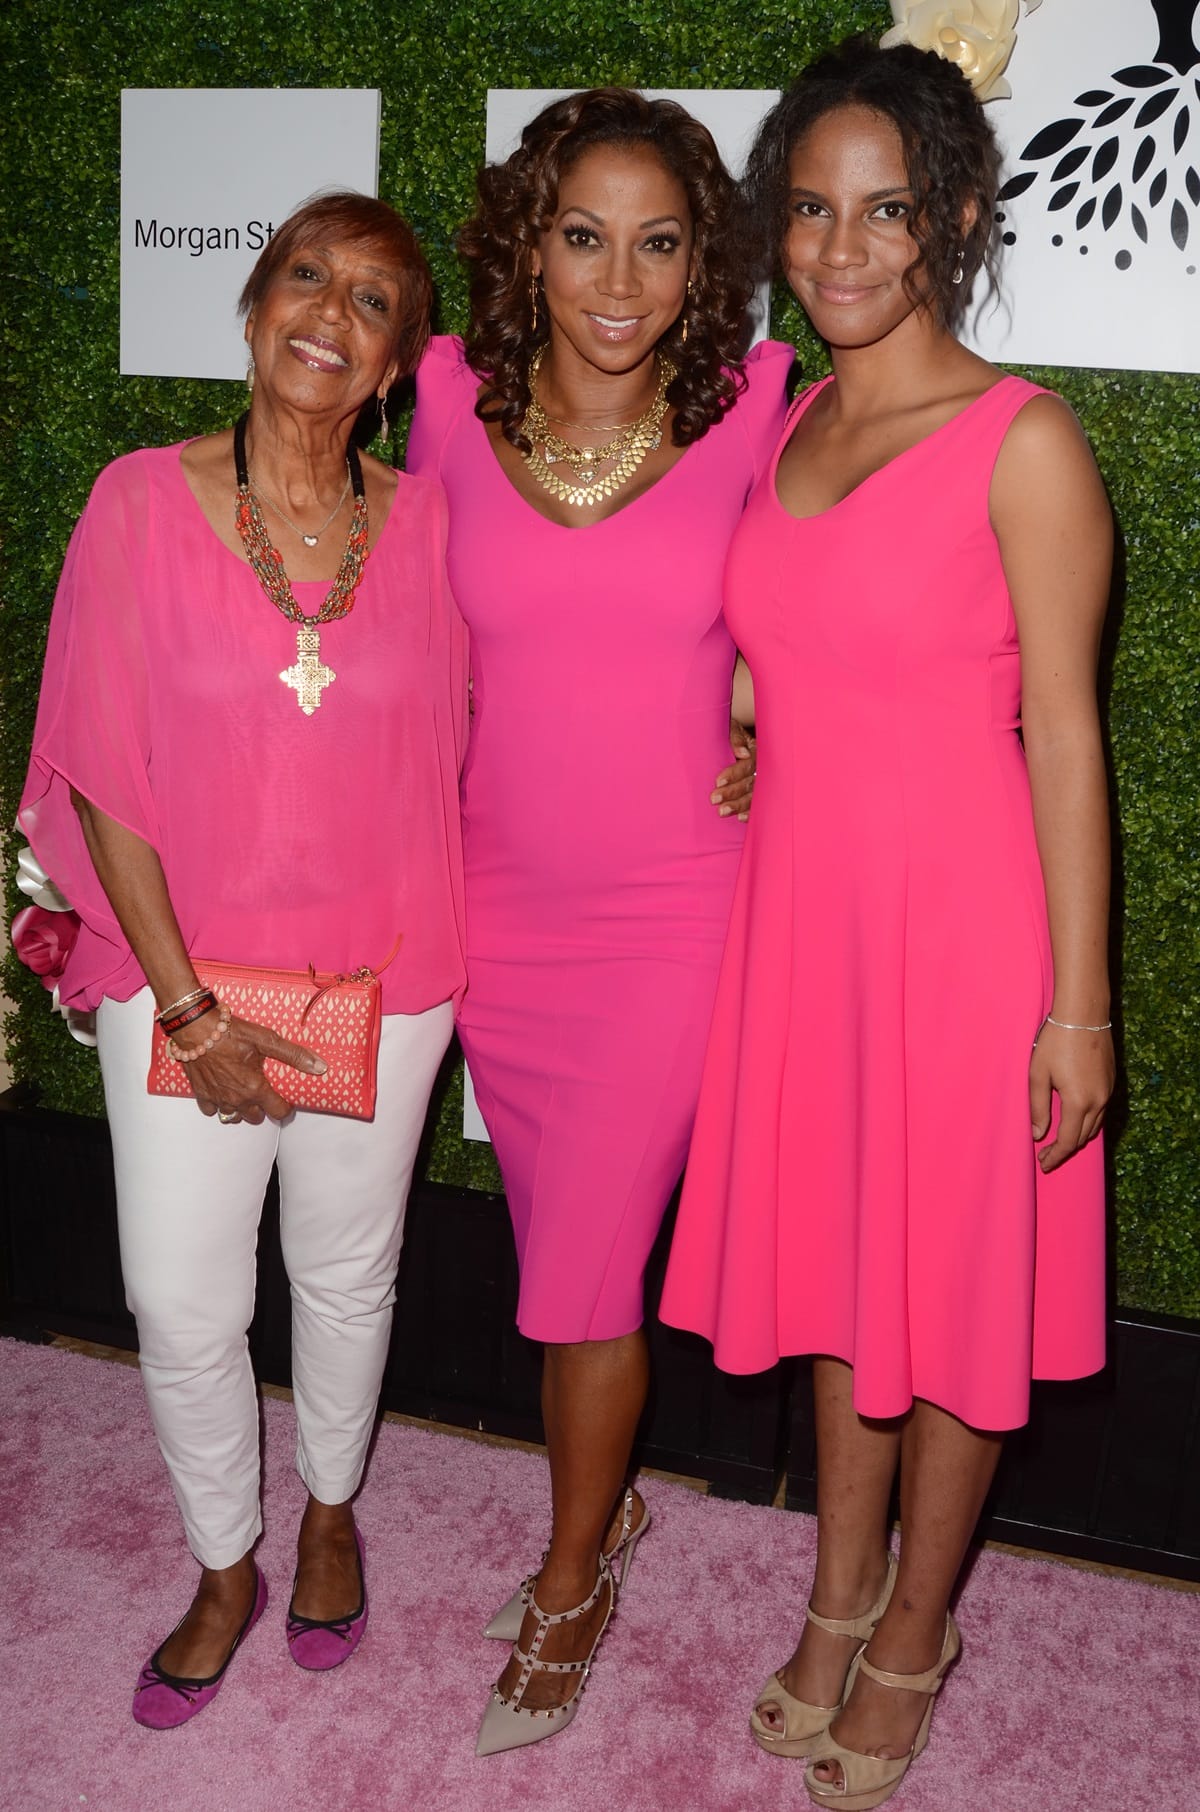 Dolores Robinson, accompanied by her daughter Holly Robinson Peete and granddaughter Ryan Elizabeth Peete, graces the arrivals of the Ladylike Foundation's 8th Annual Women Of Excellence Luncheon at The Beverly Hilton Hotel on June 4, 2016, in Beverly Hills, California